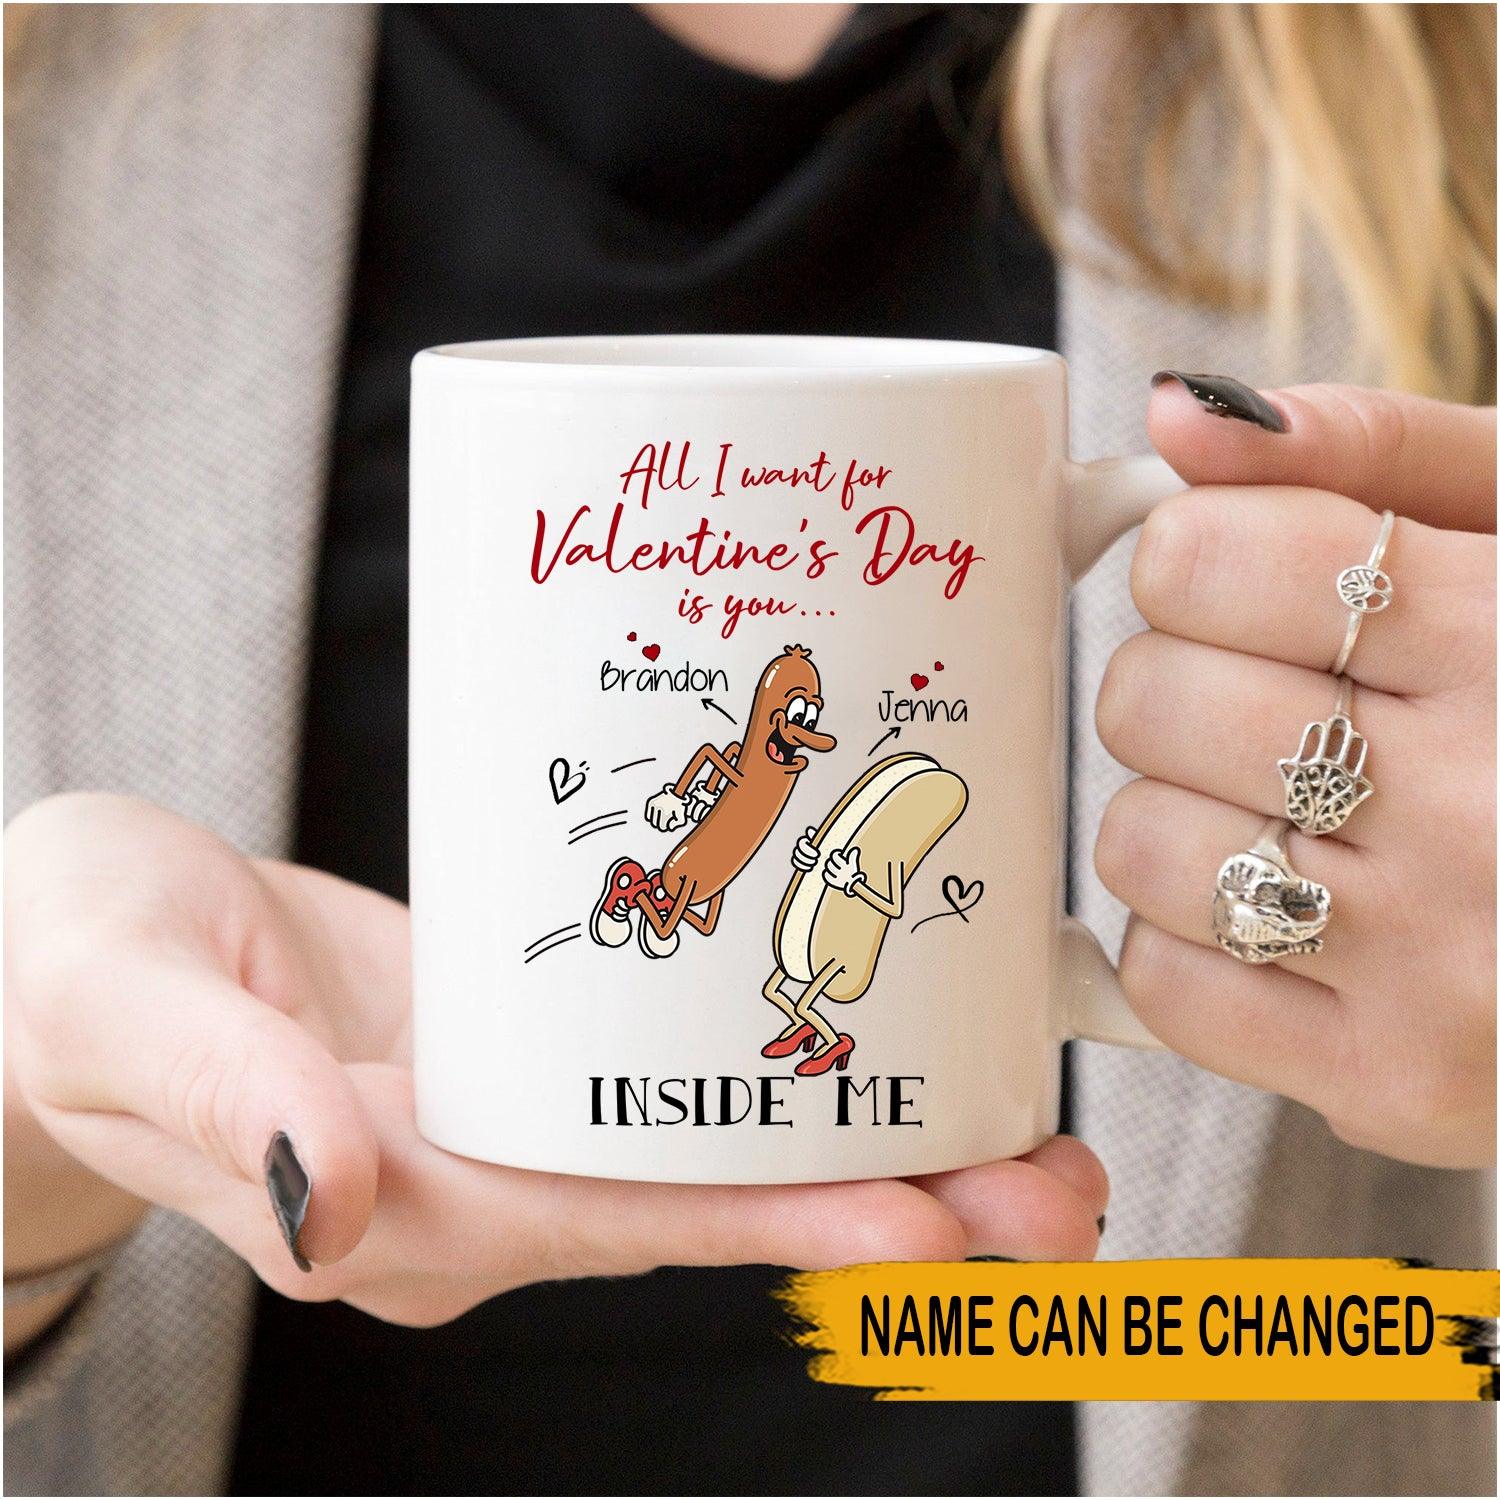 Couple Custom Mug All I Want For Valentine's Day Is You Inside Me Personalized Gift - PERSONAL84